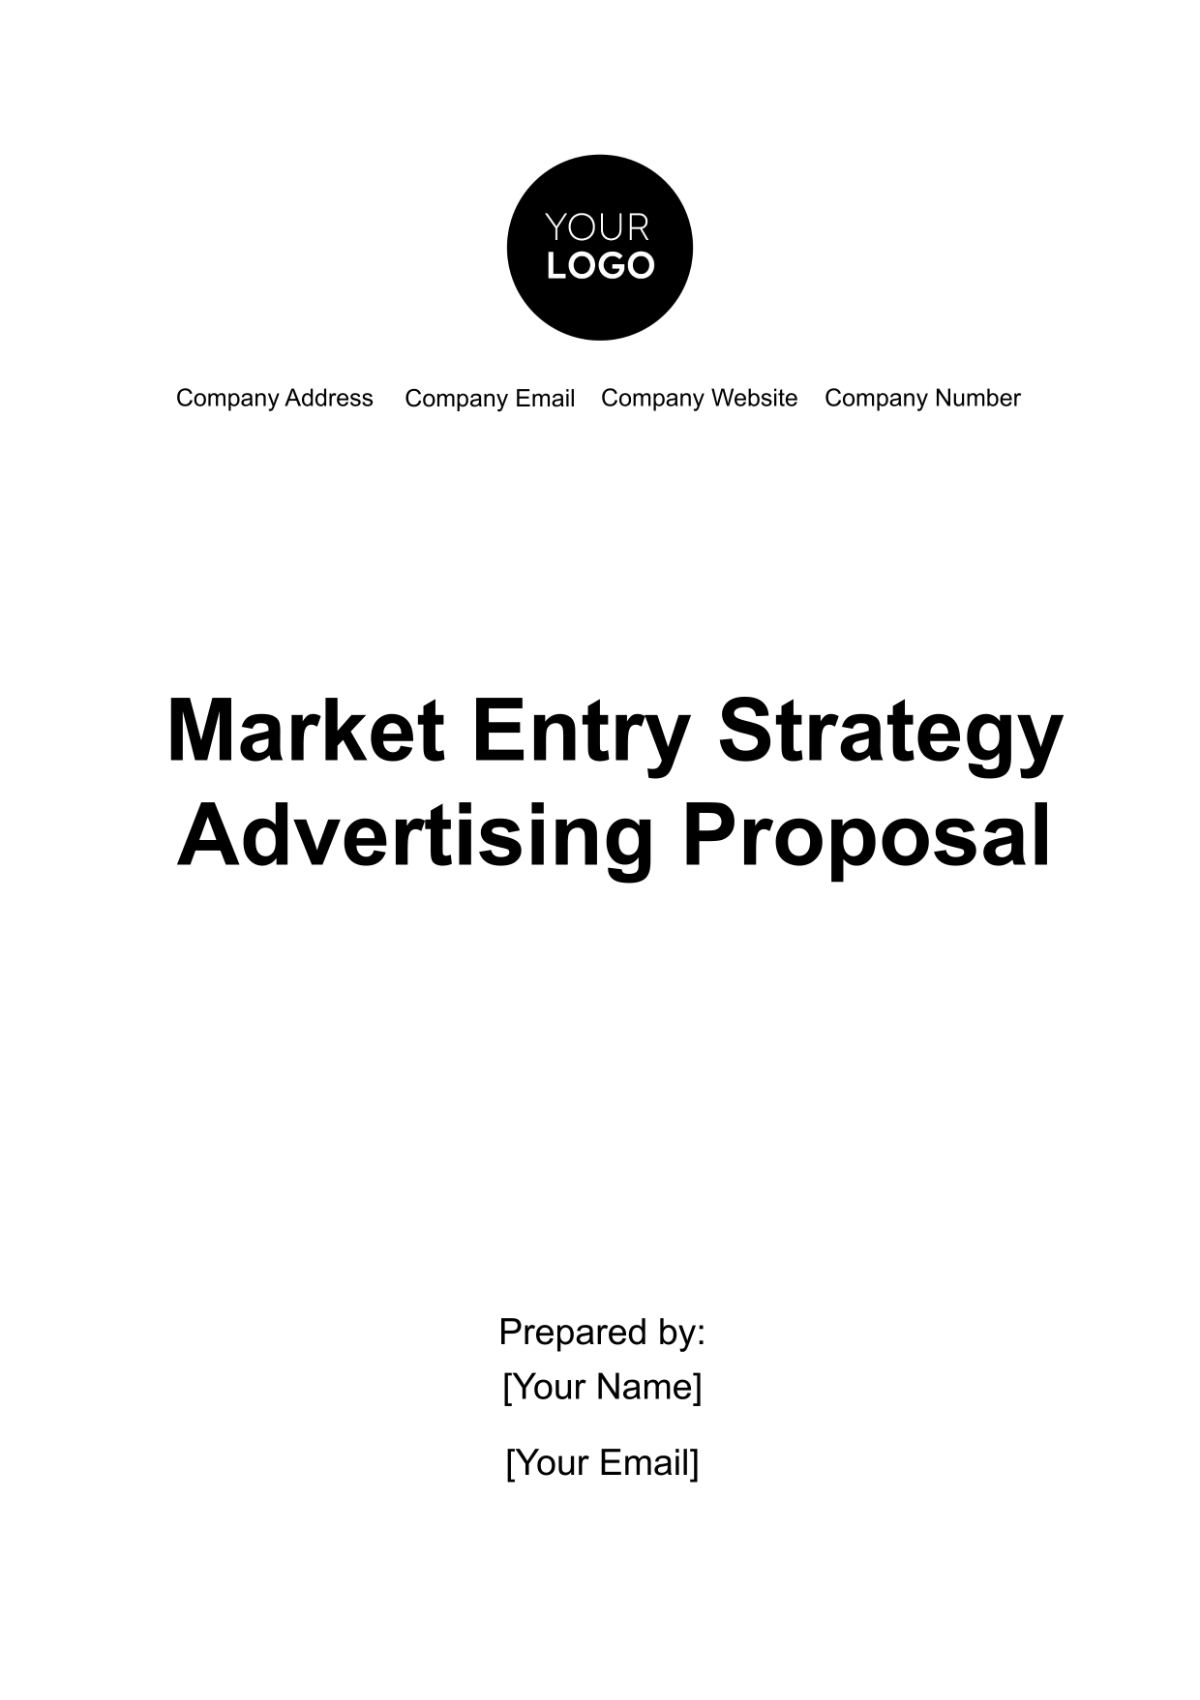 Free Market Entry Strategy Advertising Proposal Template